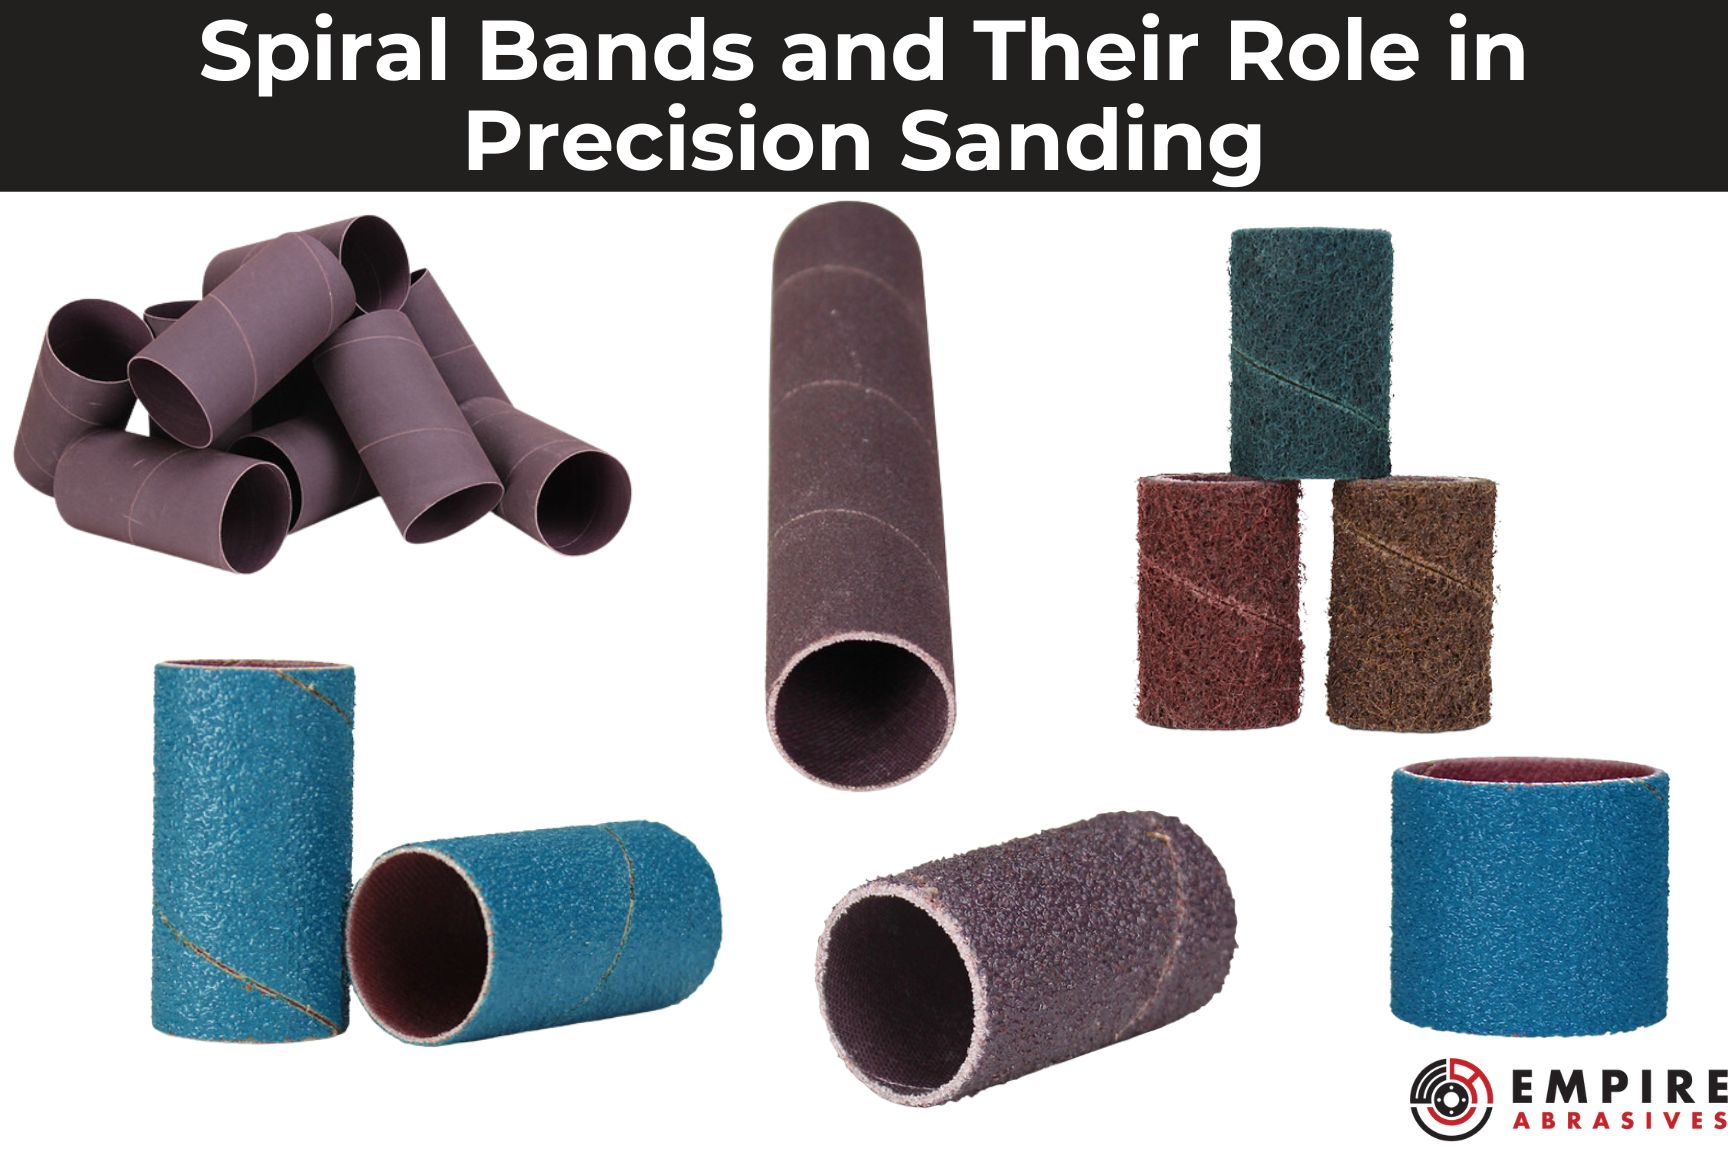 Assorted spiral bands for precision sanding from Empire Abrasives, featuring various grits and materials like aluminum oxide and zirconia for detailed work on wood, metal, and plastic surfaces